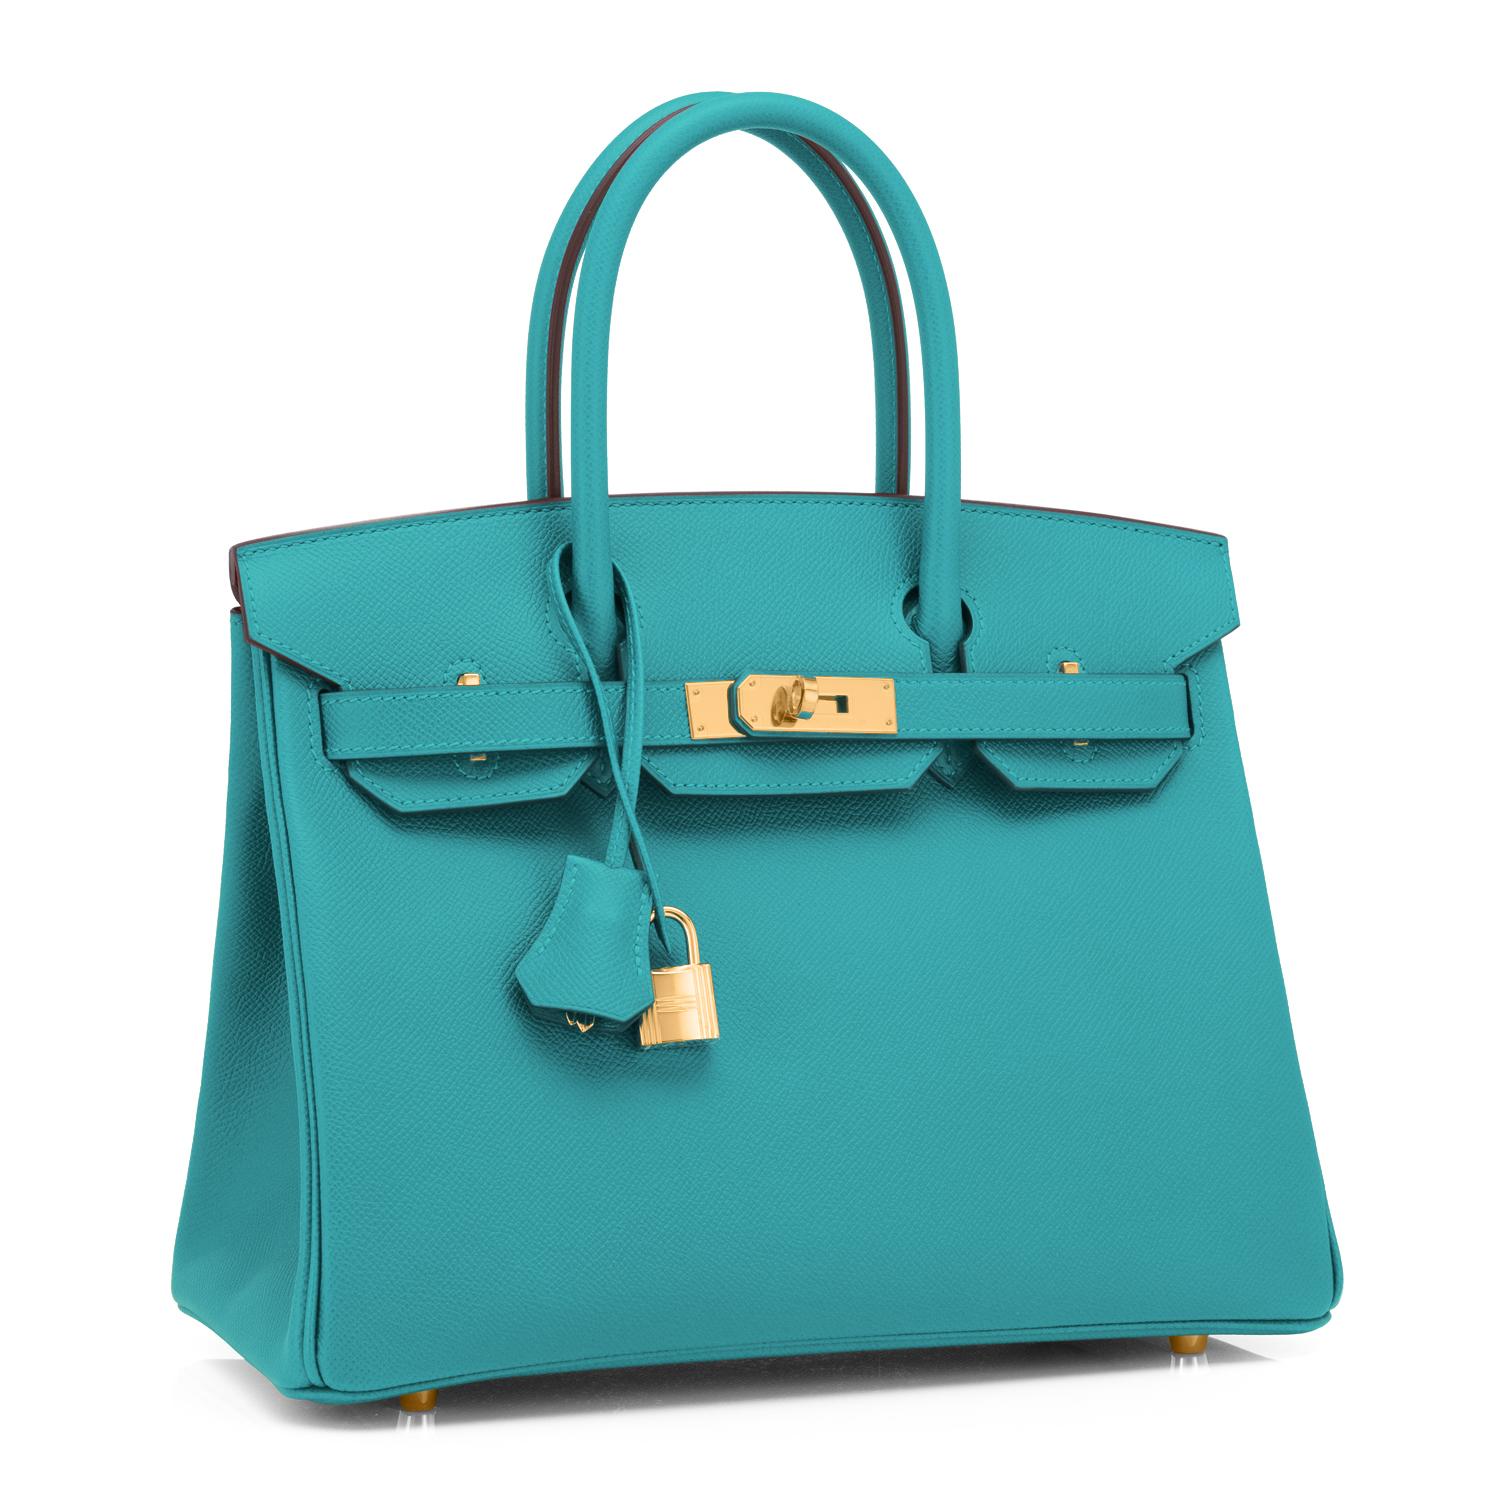 Hermes Birkin 30cm Blue Paon Peacock Turquoise Jewel Tone Epsom Gold Bag Y Stamp, 2020
Devastatingly gorgeous!! Very rare reissue of cult favorite jewel tone Blue Paon 